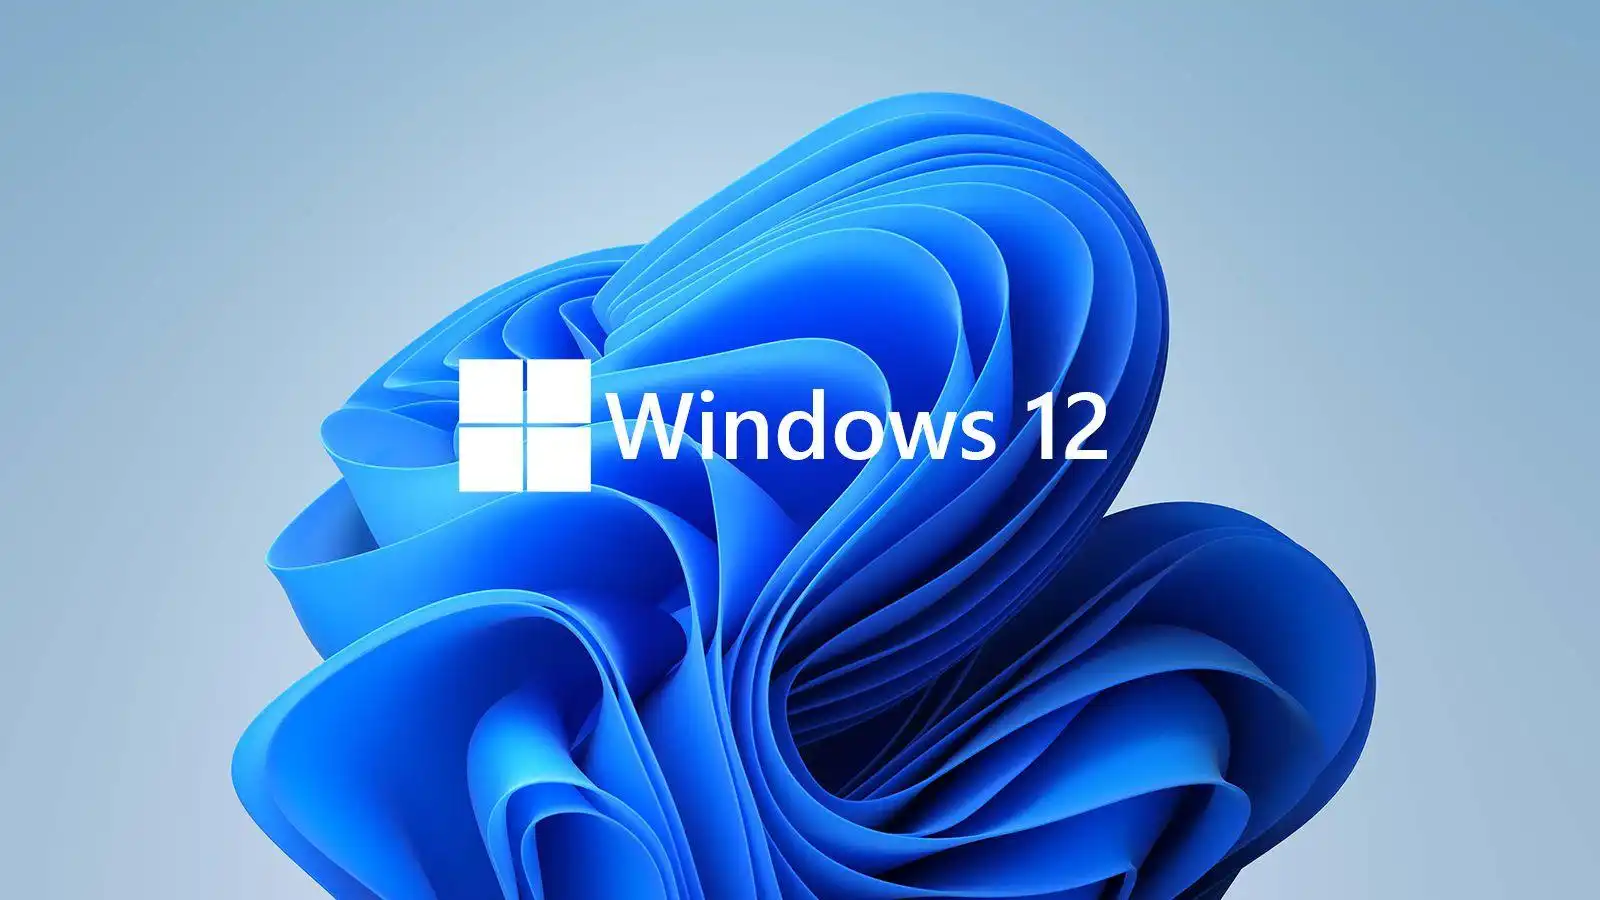 WINDOWS 12 EXPECTED RELEASE AND PRICE